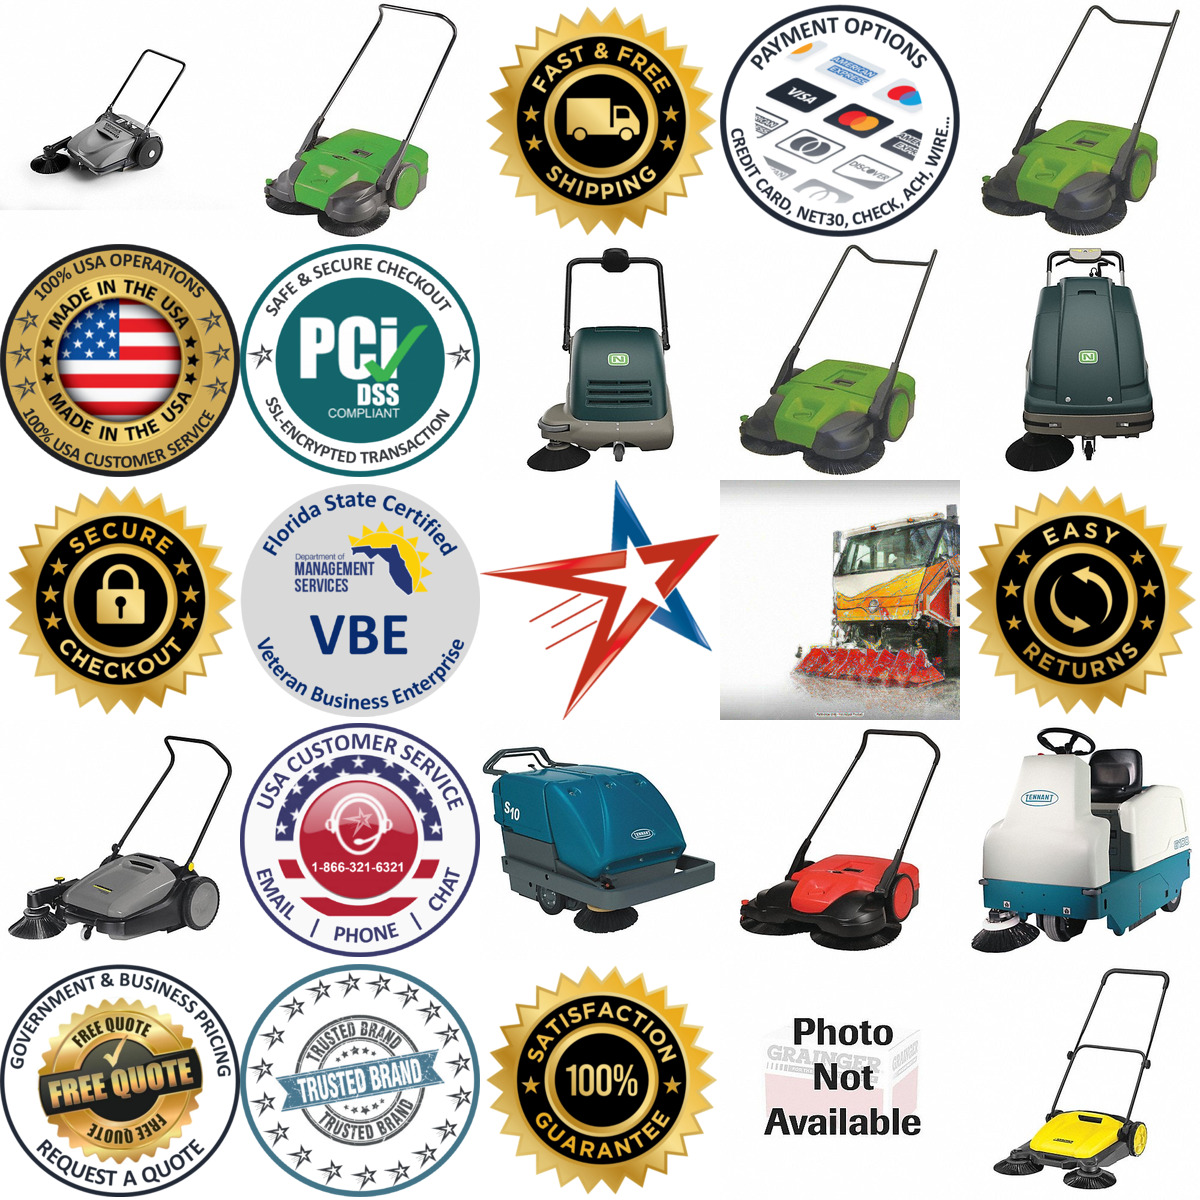 A selection of Large Area Sweepers products on GoVets